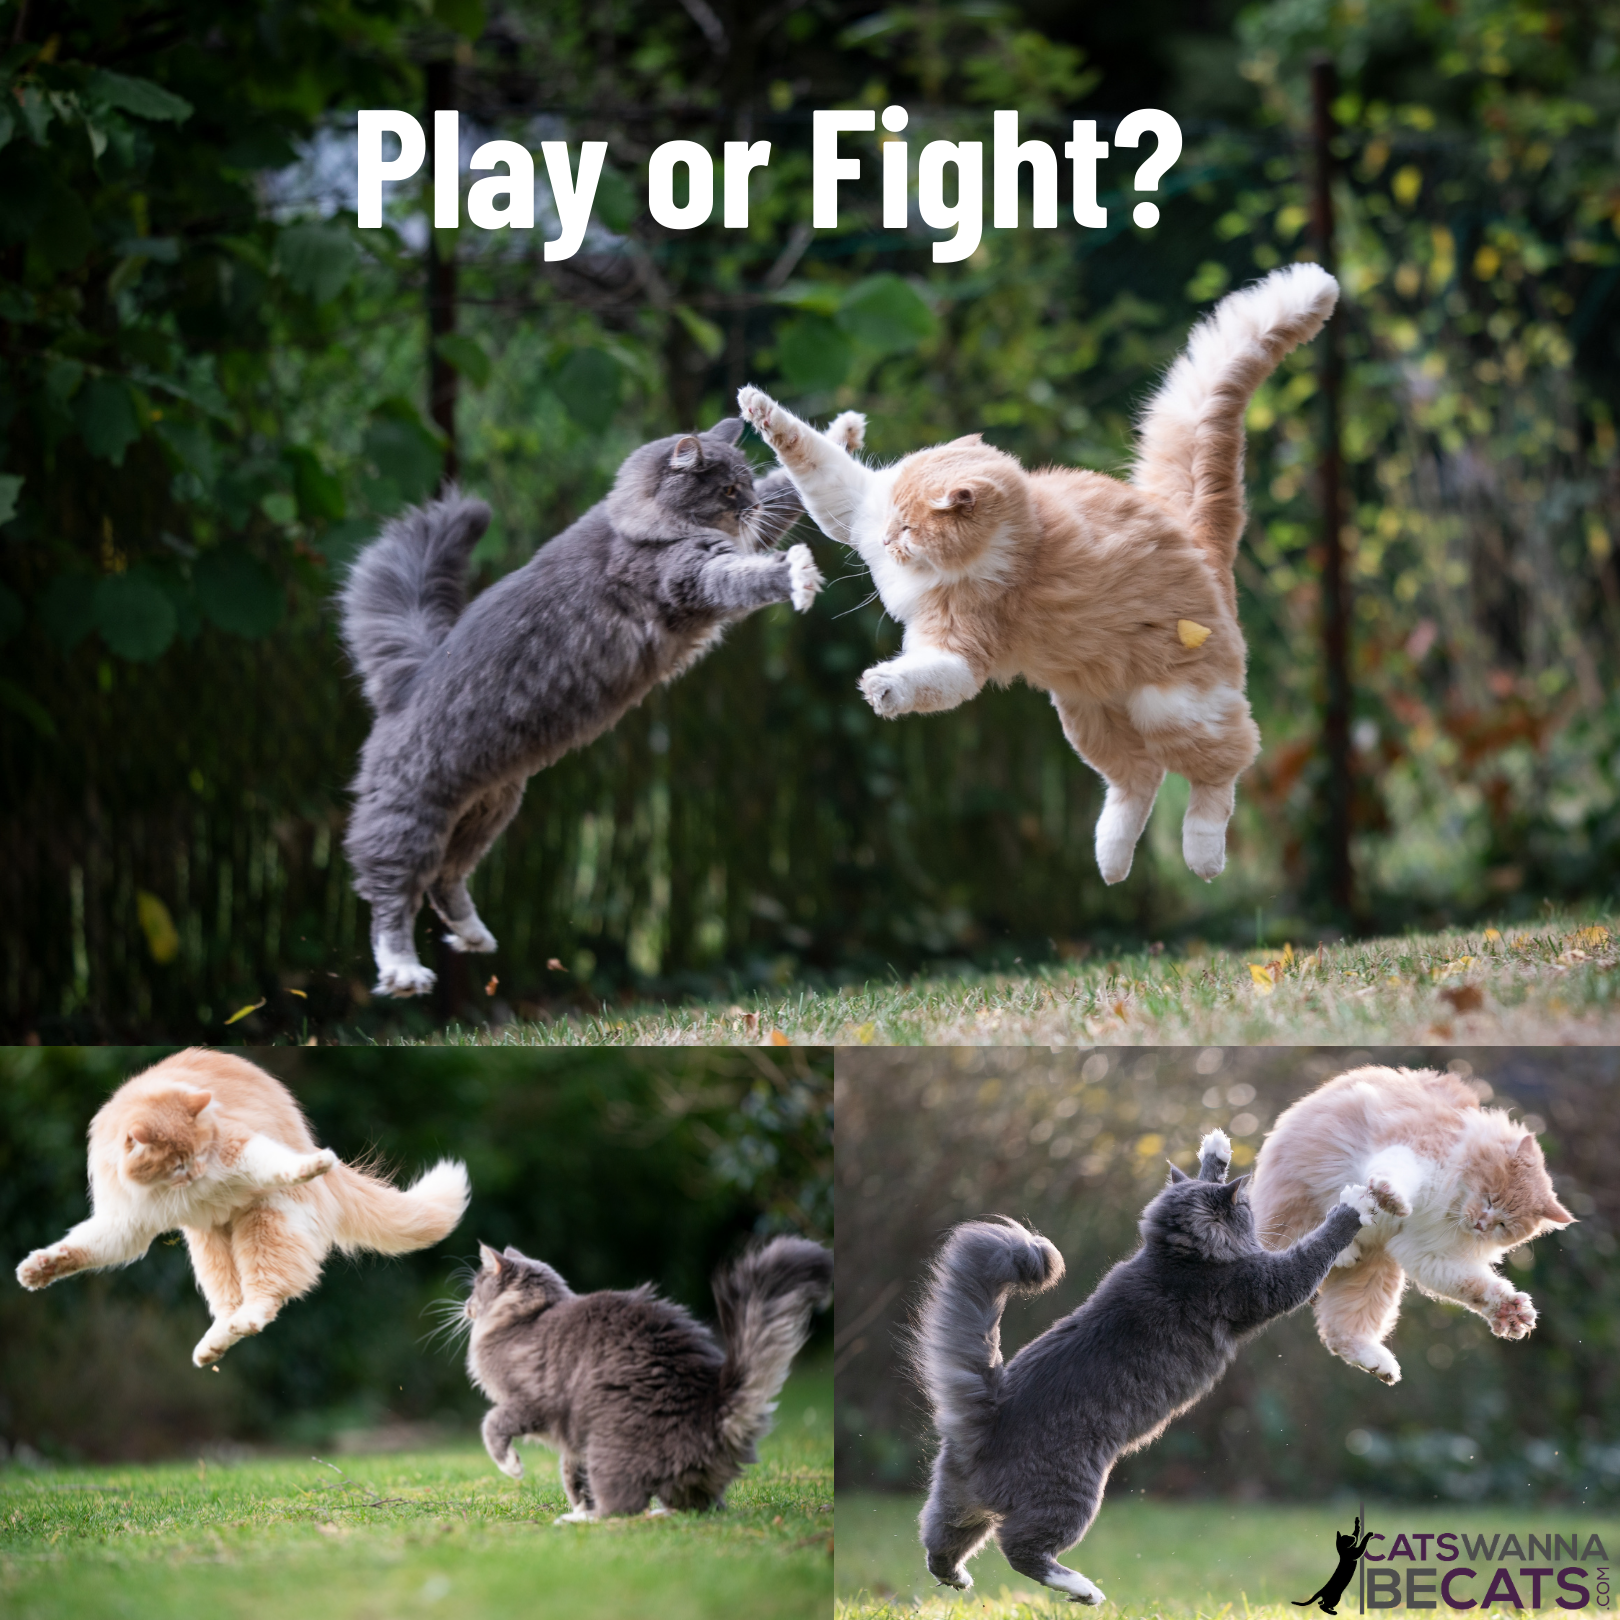 Cats playing or fighting